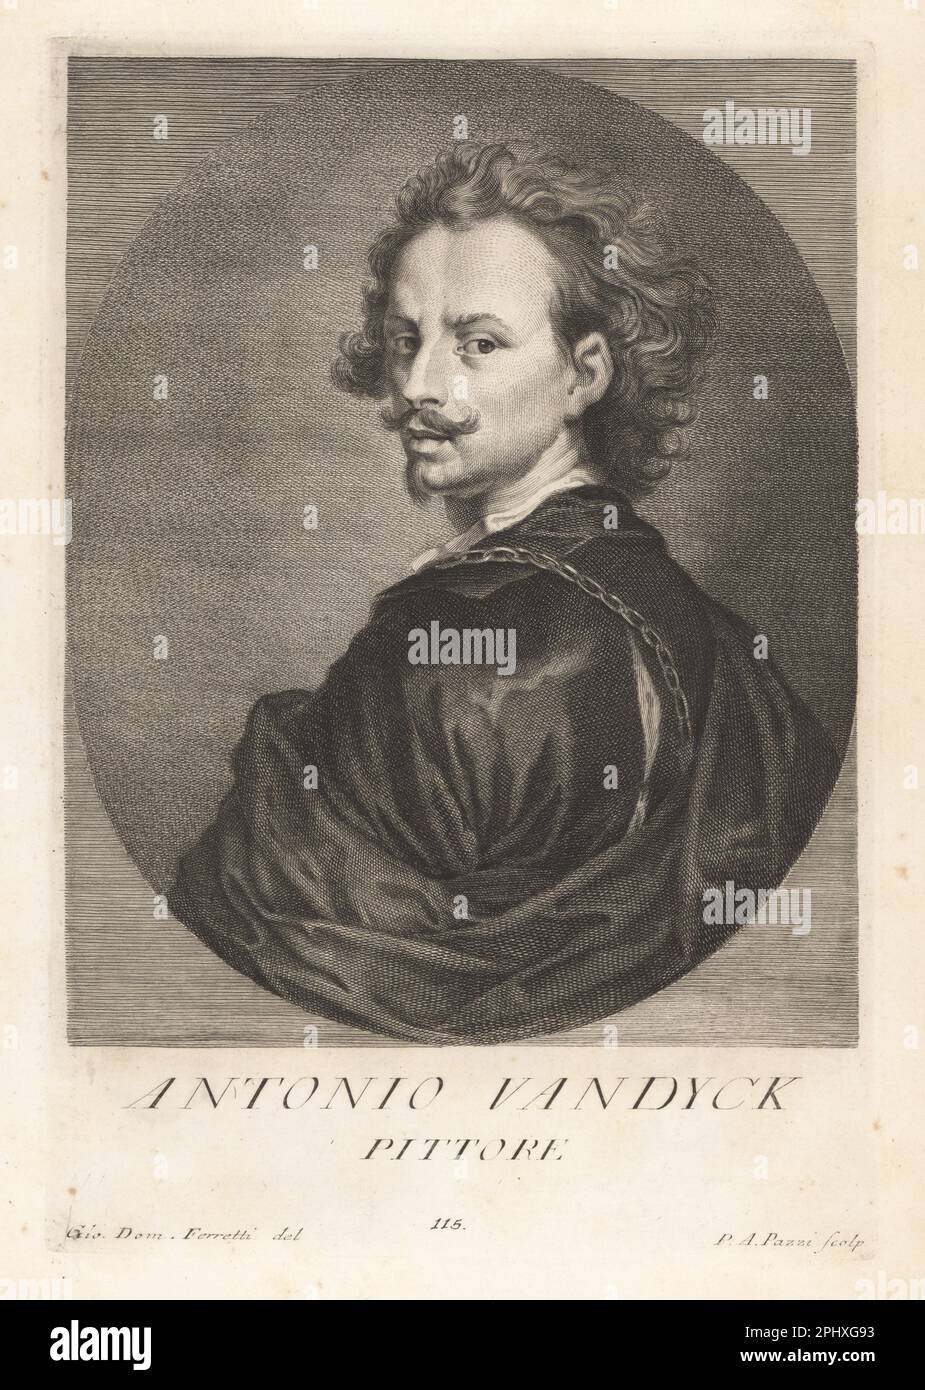 Sir Anthony van Dyck, Flemish Baroque artist who became the leading court painter in England after success in the Spanish Netherlands and Italy, 1599-1641. Antonio Vandyck, Pittore. Copperplate engraving by Pietro Antonio Pazzi after Giovanni Domenico Ferretti after a self portrait by the artist from Francesco Moucke's Museo Florentino (Museum Florentinum), Serie di Ritratti de Pittori (Series of Portraits of Painters) stamperia Mouckiana, Florence, 1752-62. Stock Photo